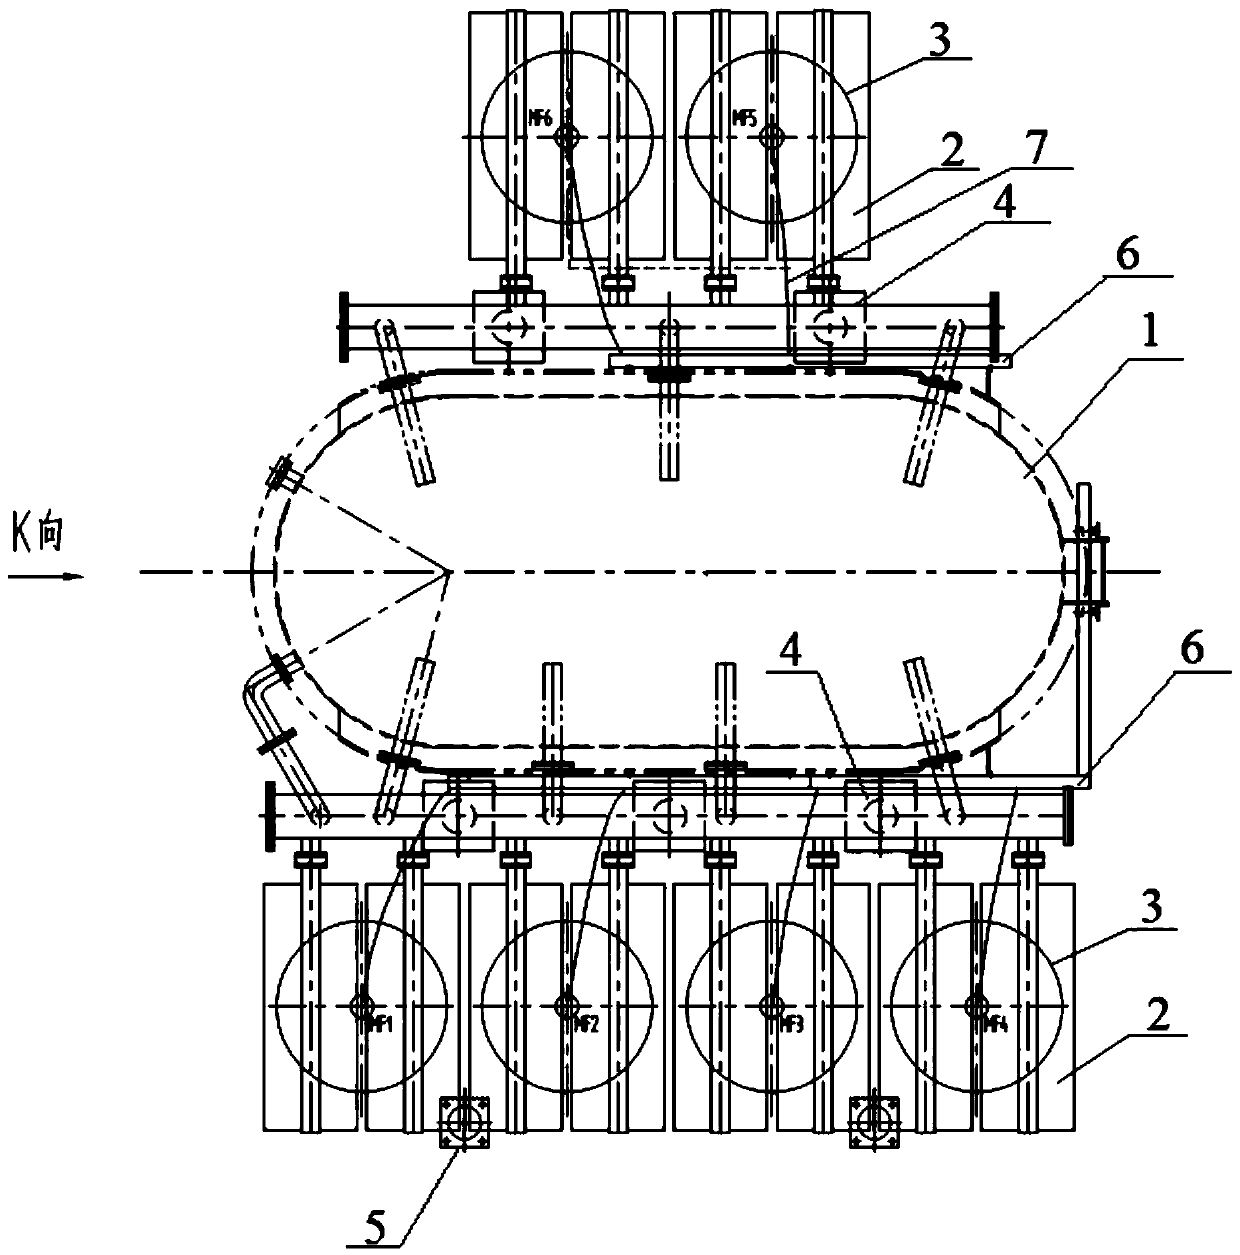 Device and method for increasing capacity of oil-immersed transformer